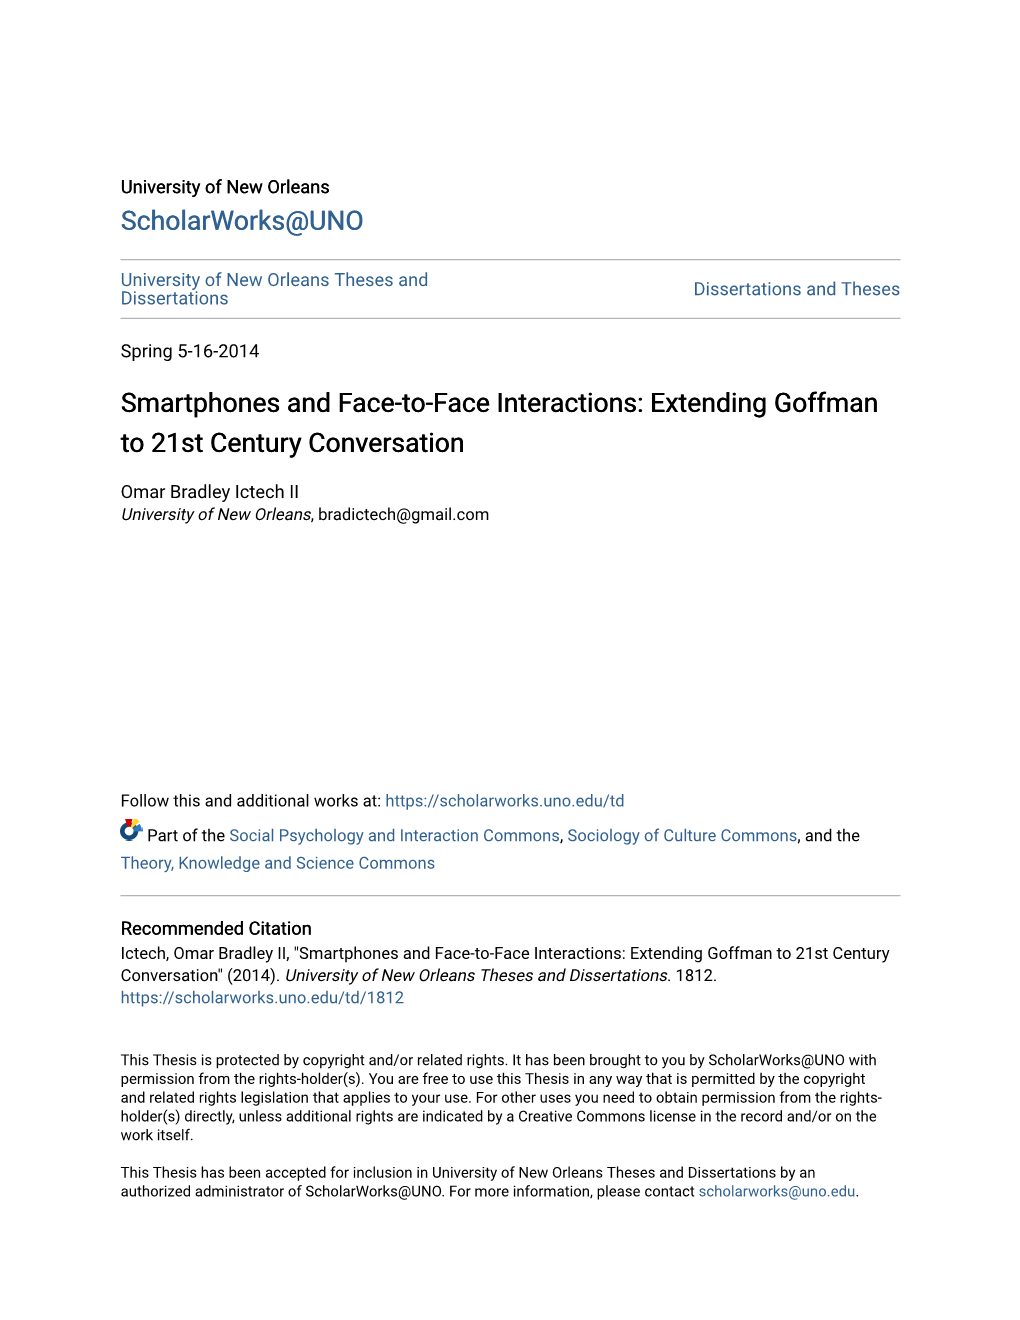 Smartphones and Face-To-Face Interactions: Extending Goffman to 21St Century Conversation